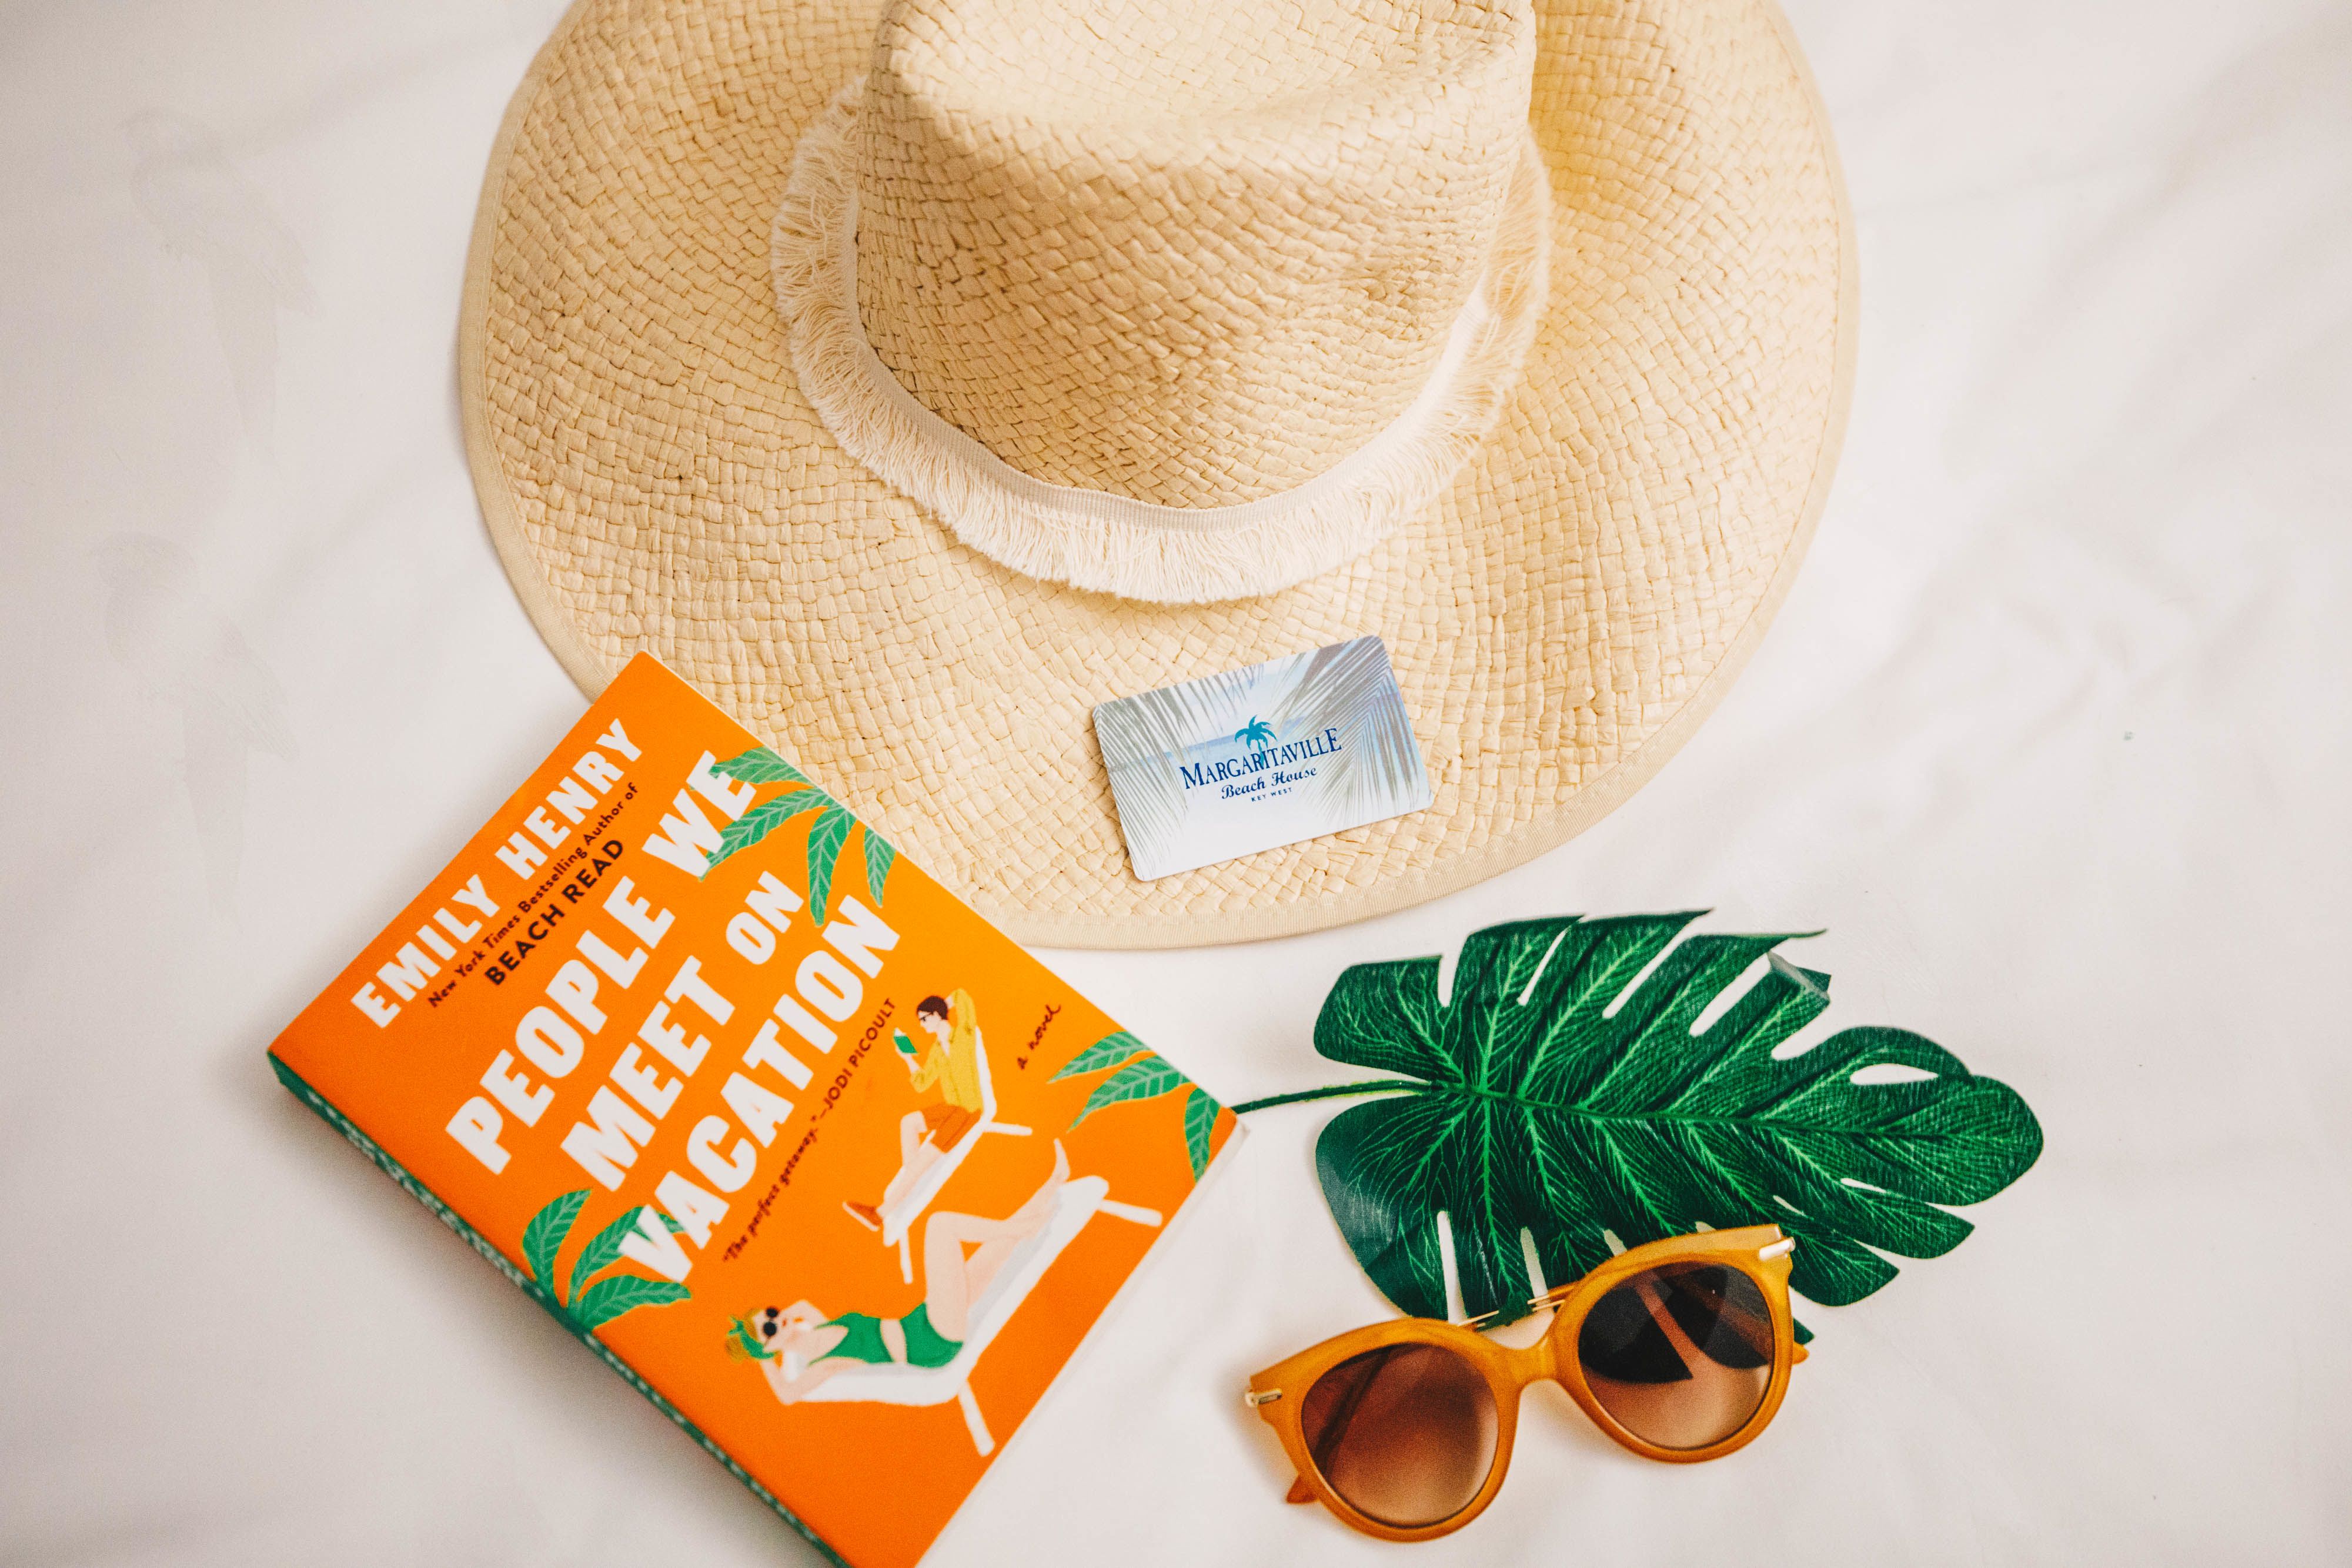 Straw hat with a book and sunglasses and hotel room key